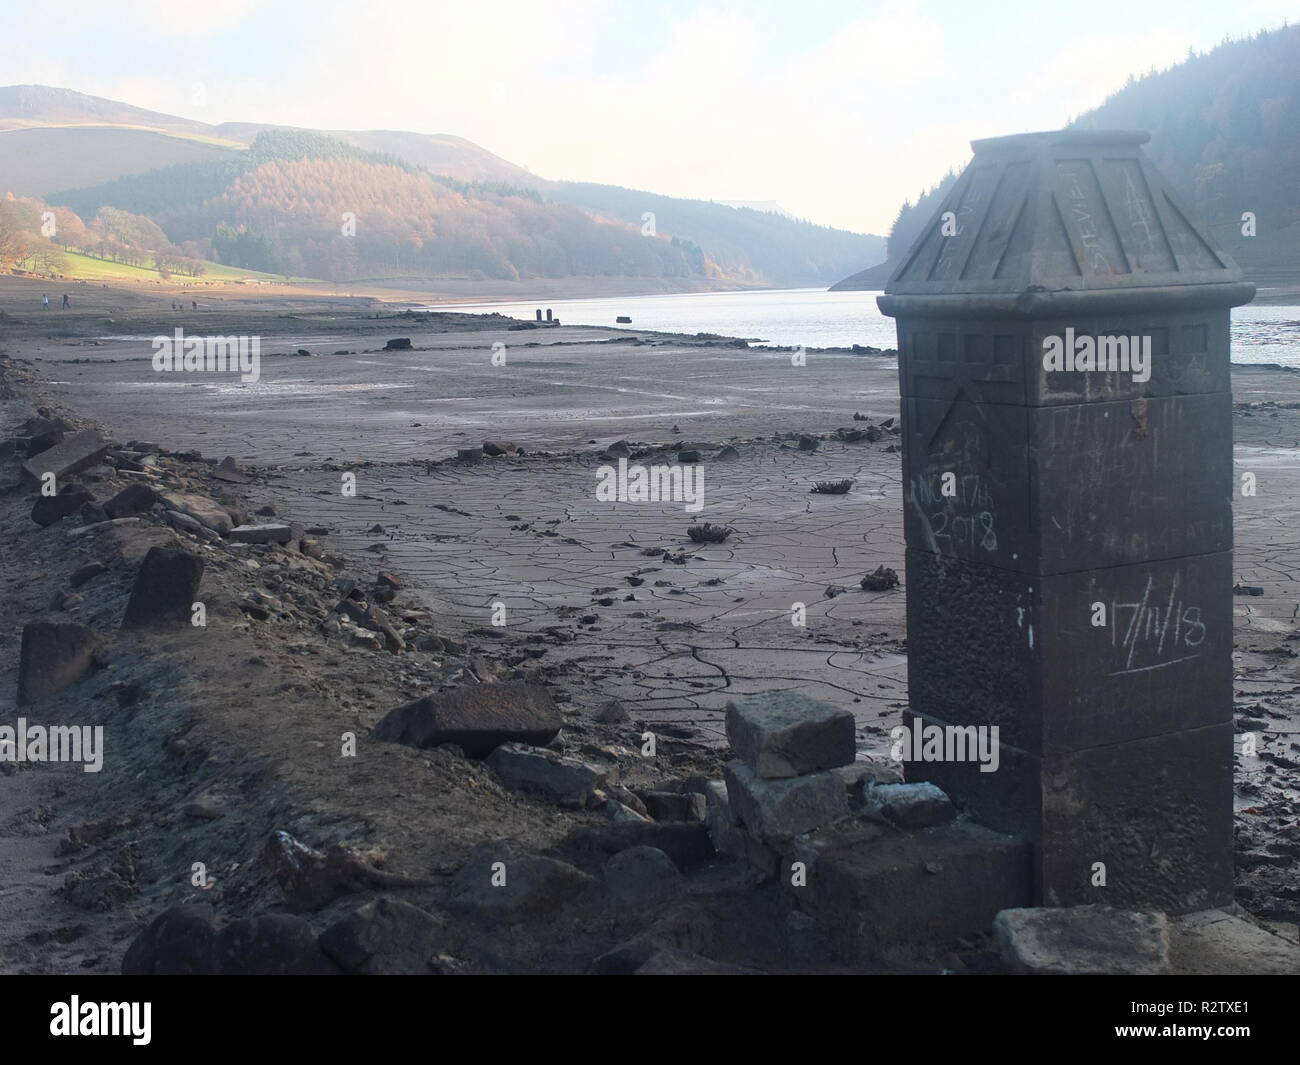 The exposed ruins of the demolished Derwent Hall normally on bed of Ladybower Reservoir, exposed by low water levels following 2018 heatwave Stock Photo